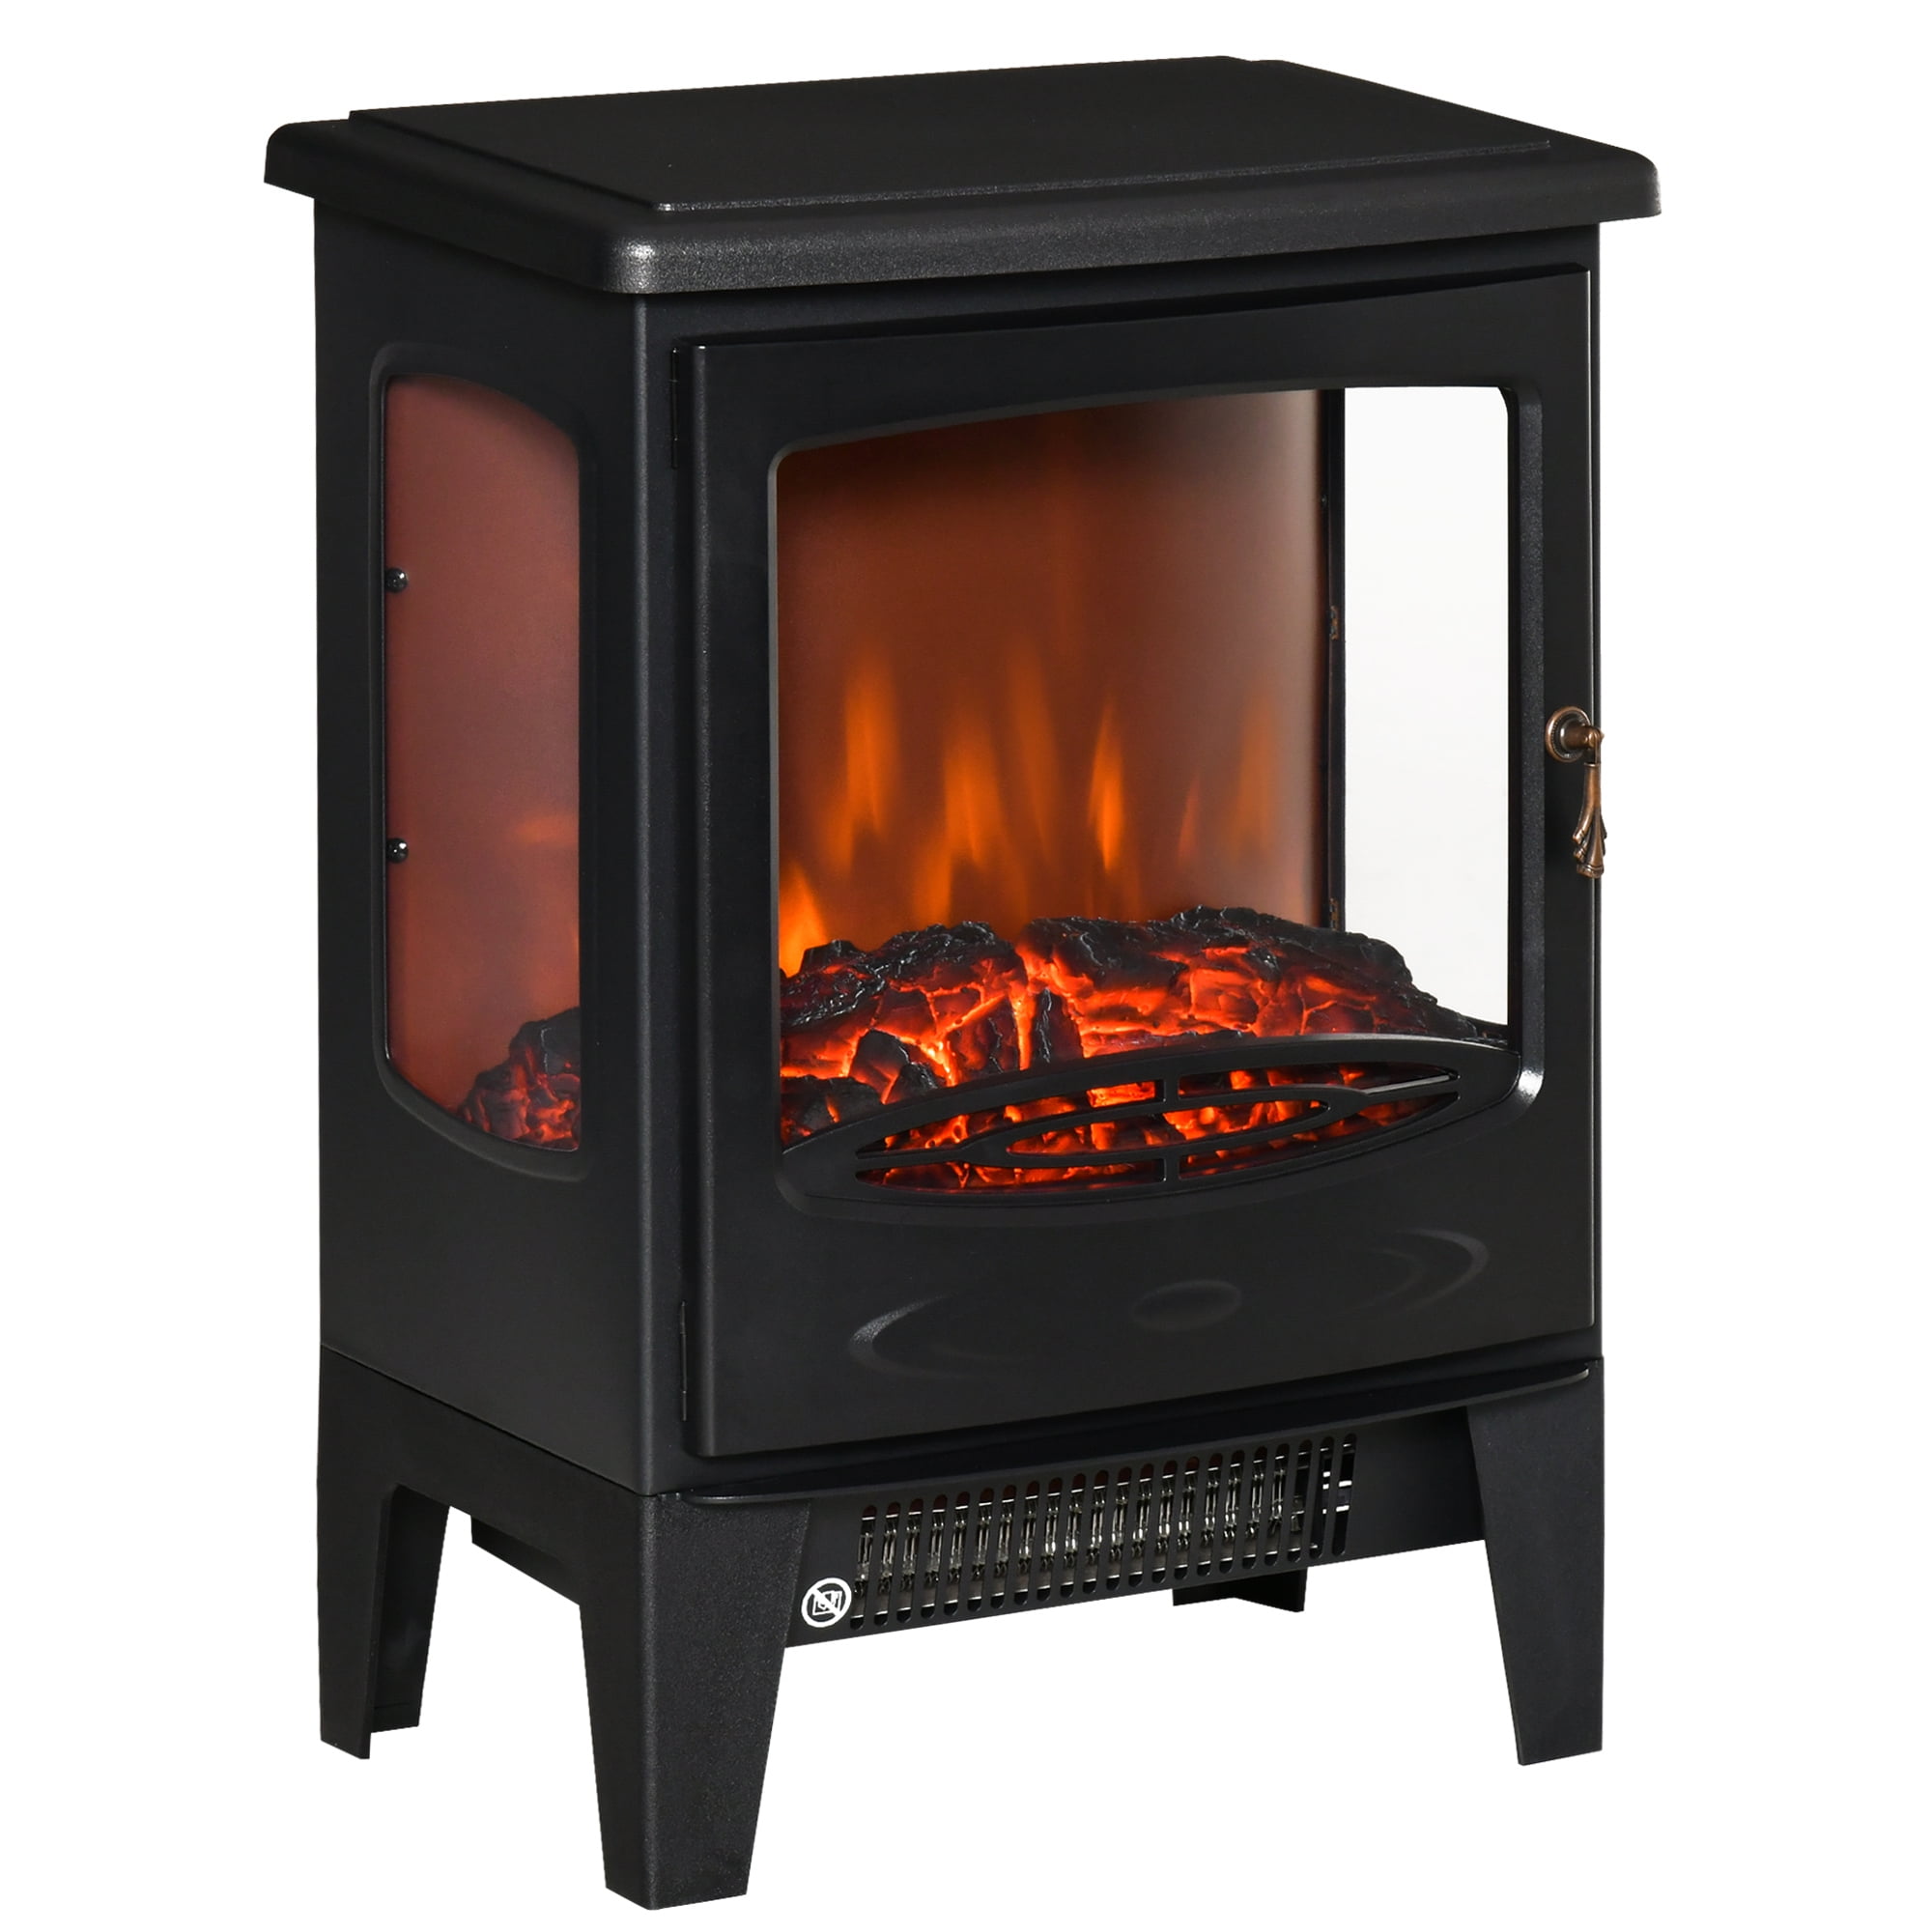 Homcom Electric Fireplace Heater, Best Realistic Freestanding Electric Fireplace